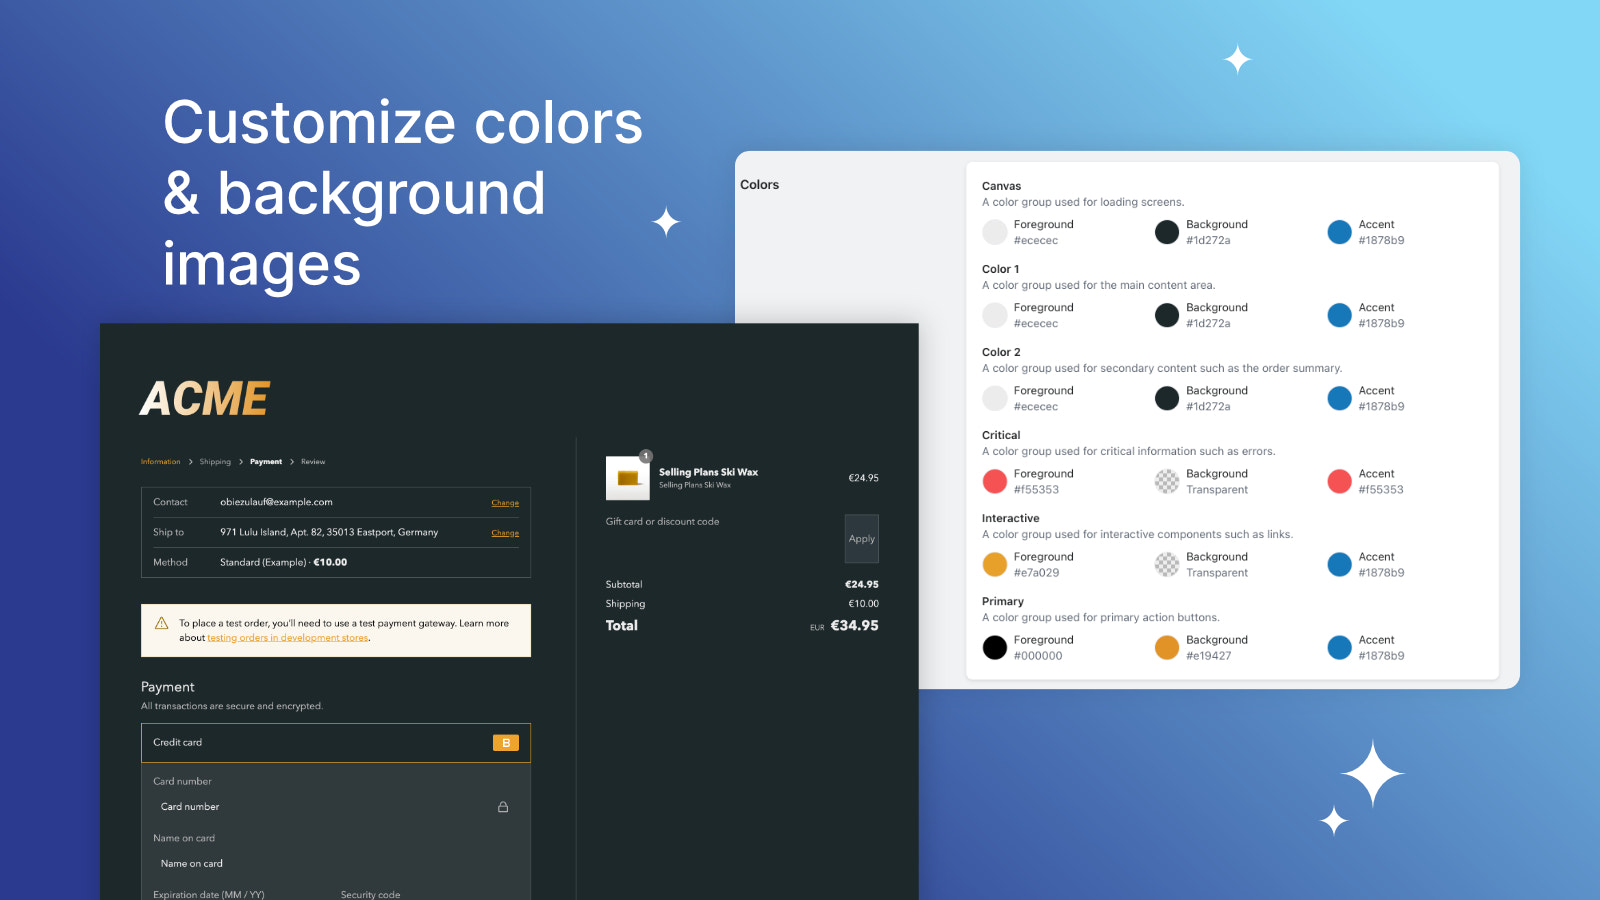 Customize colors & background images